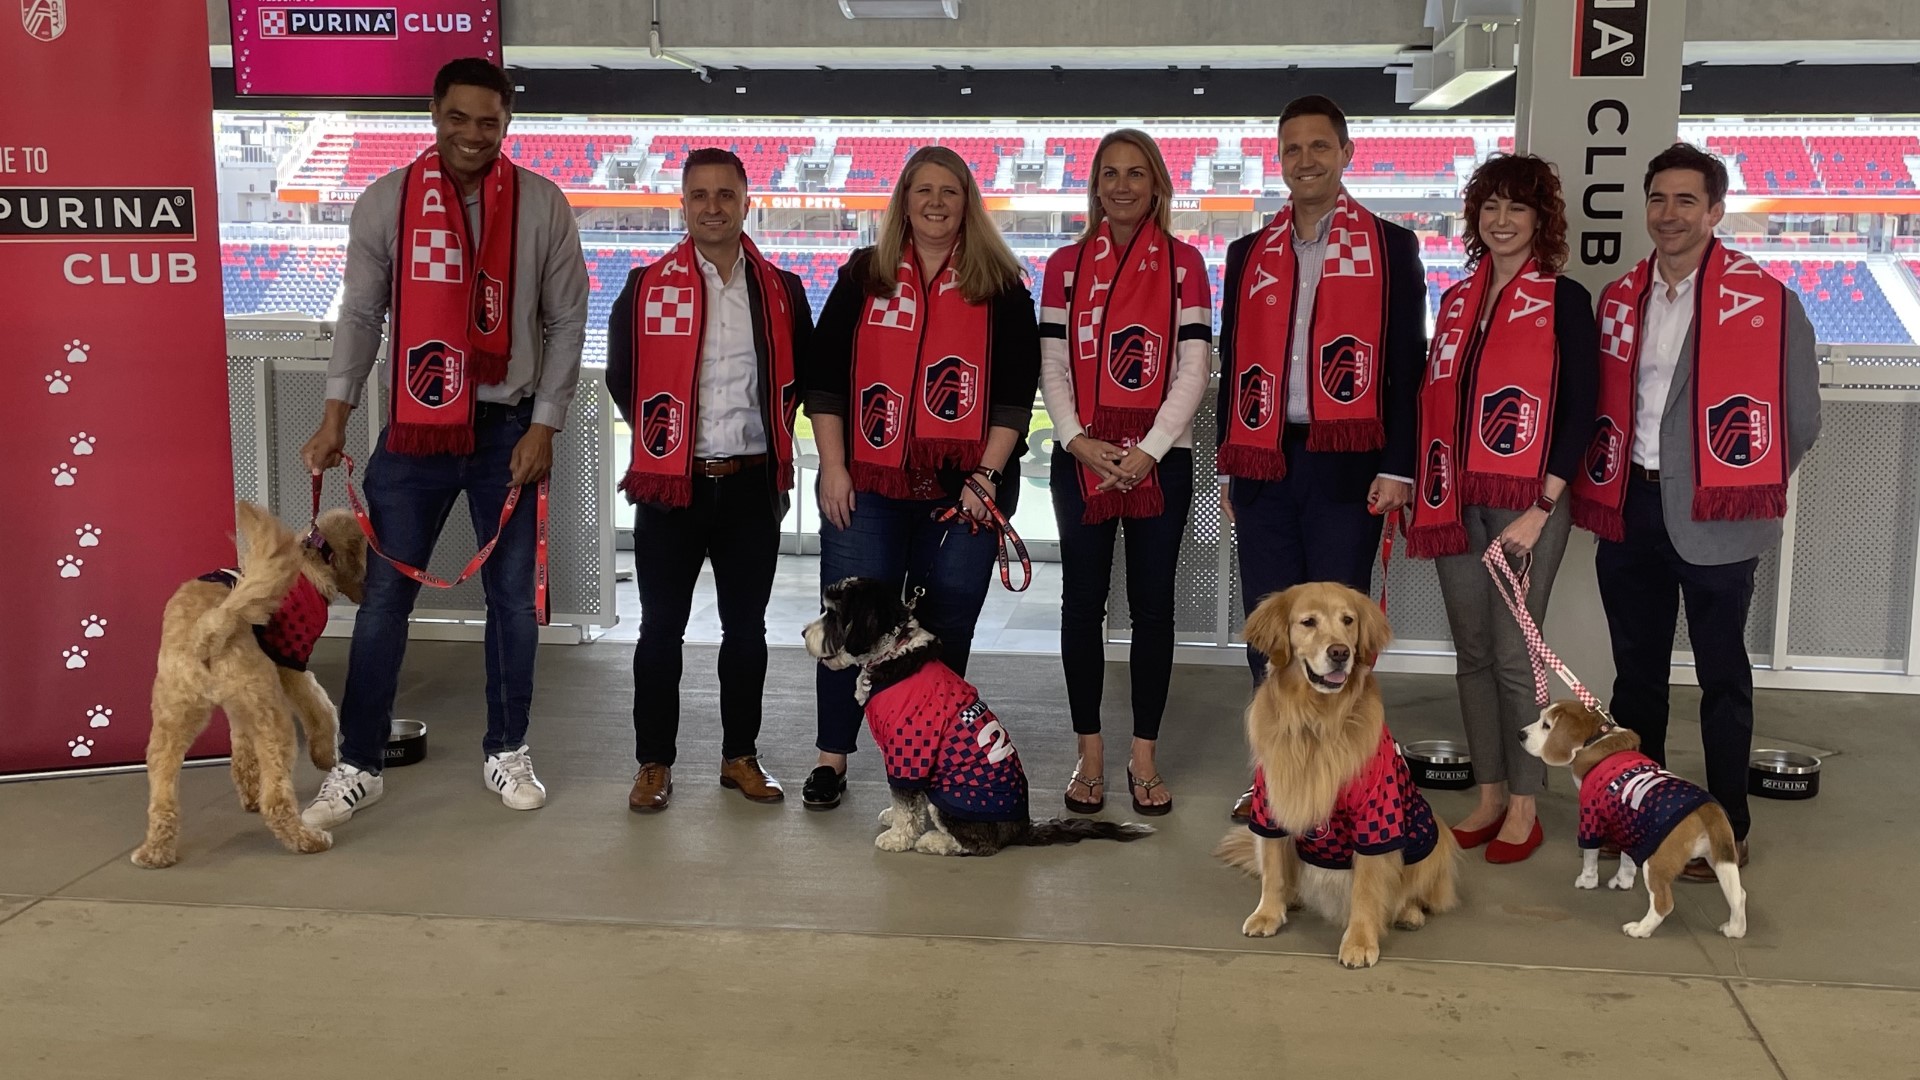 St. Louis CITY SC and Purina unveiled The Purina Club on Friday. Reservations are now open.